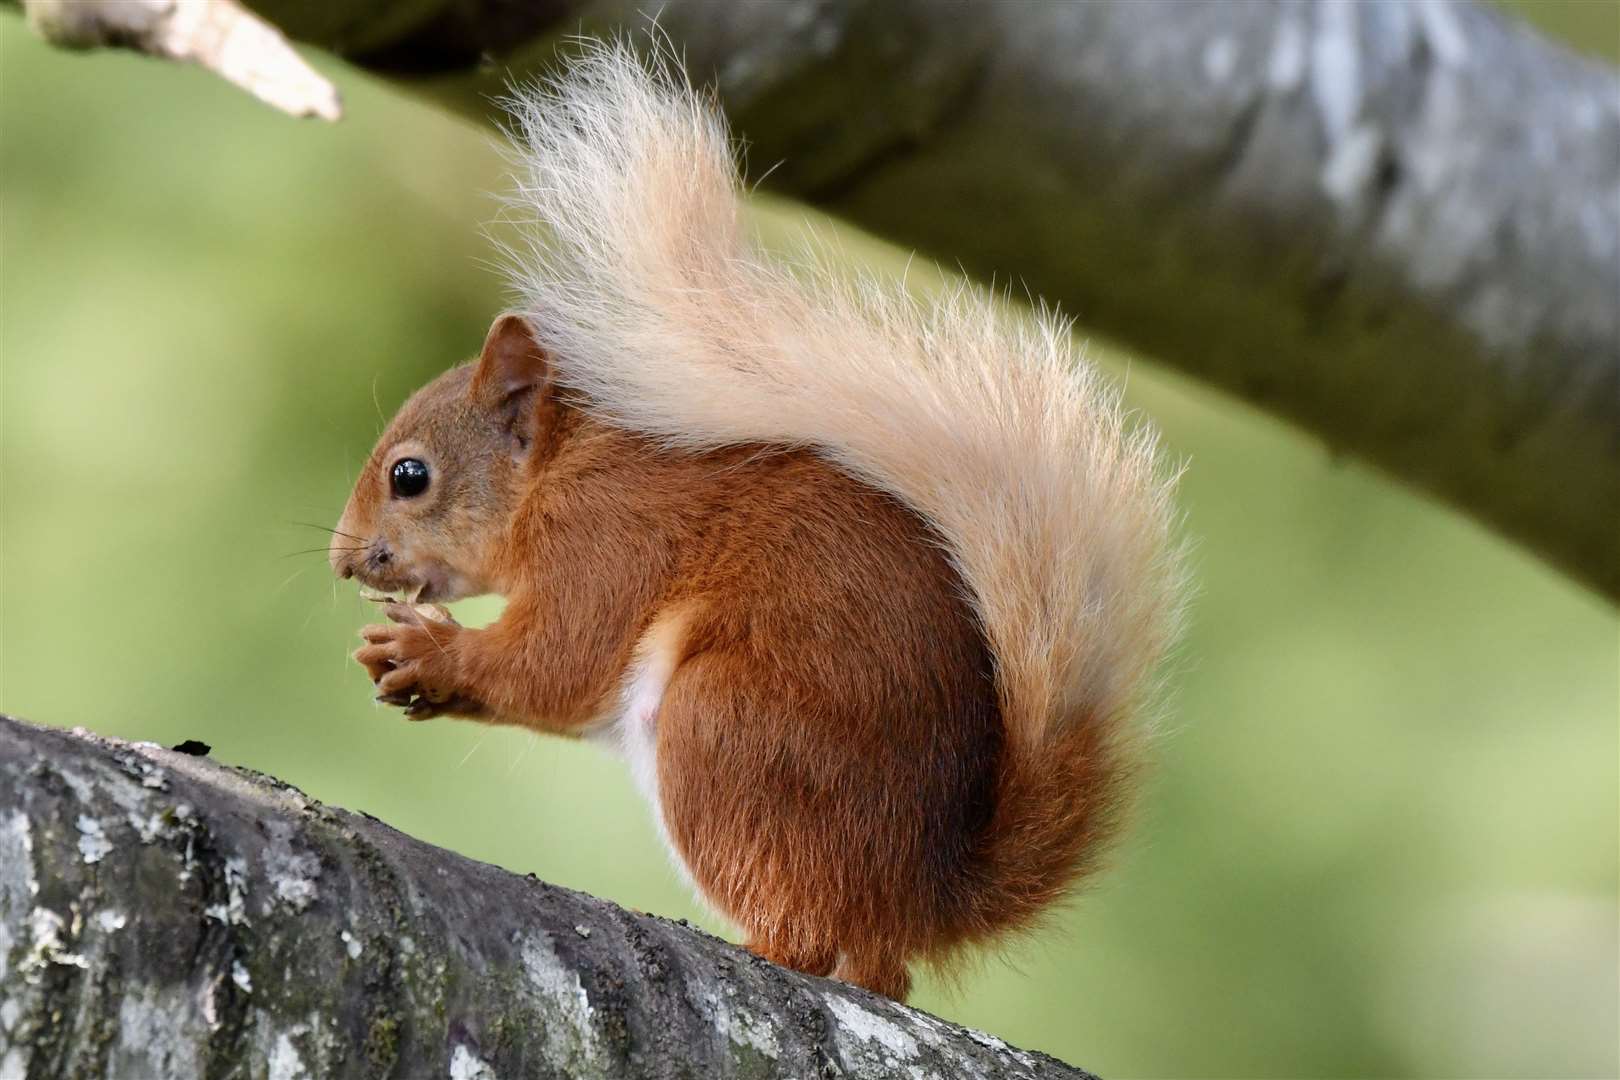 Wildlife nuts across Scotland have been encouraged to note their squirrel encounters. Picture: Hazel Thomson.